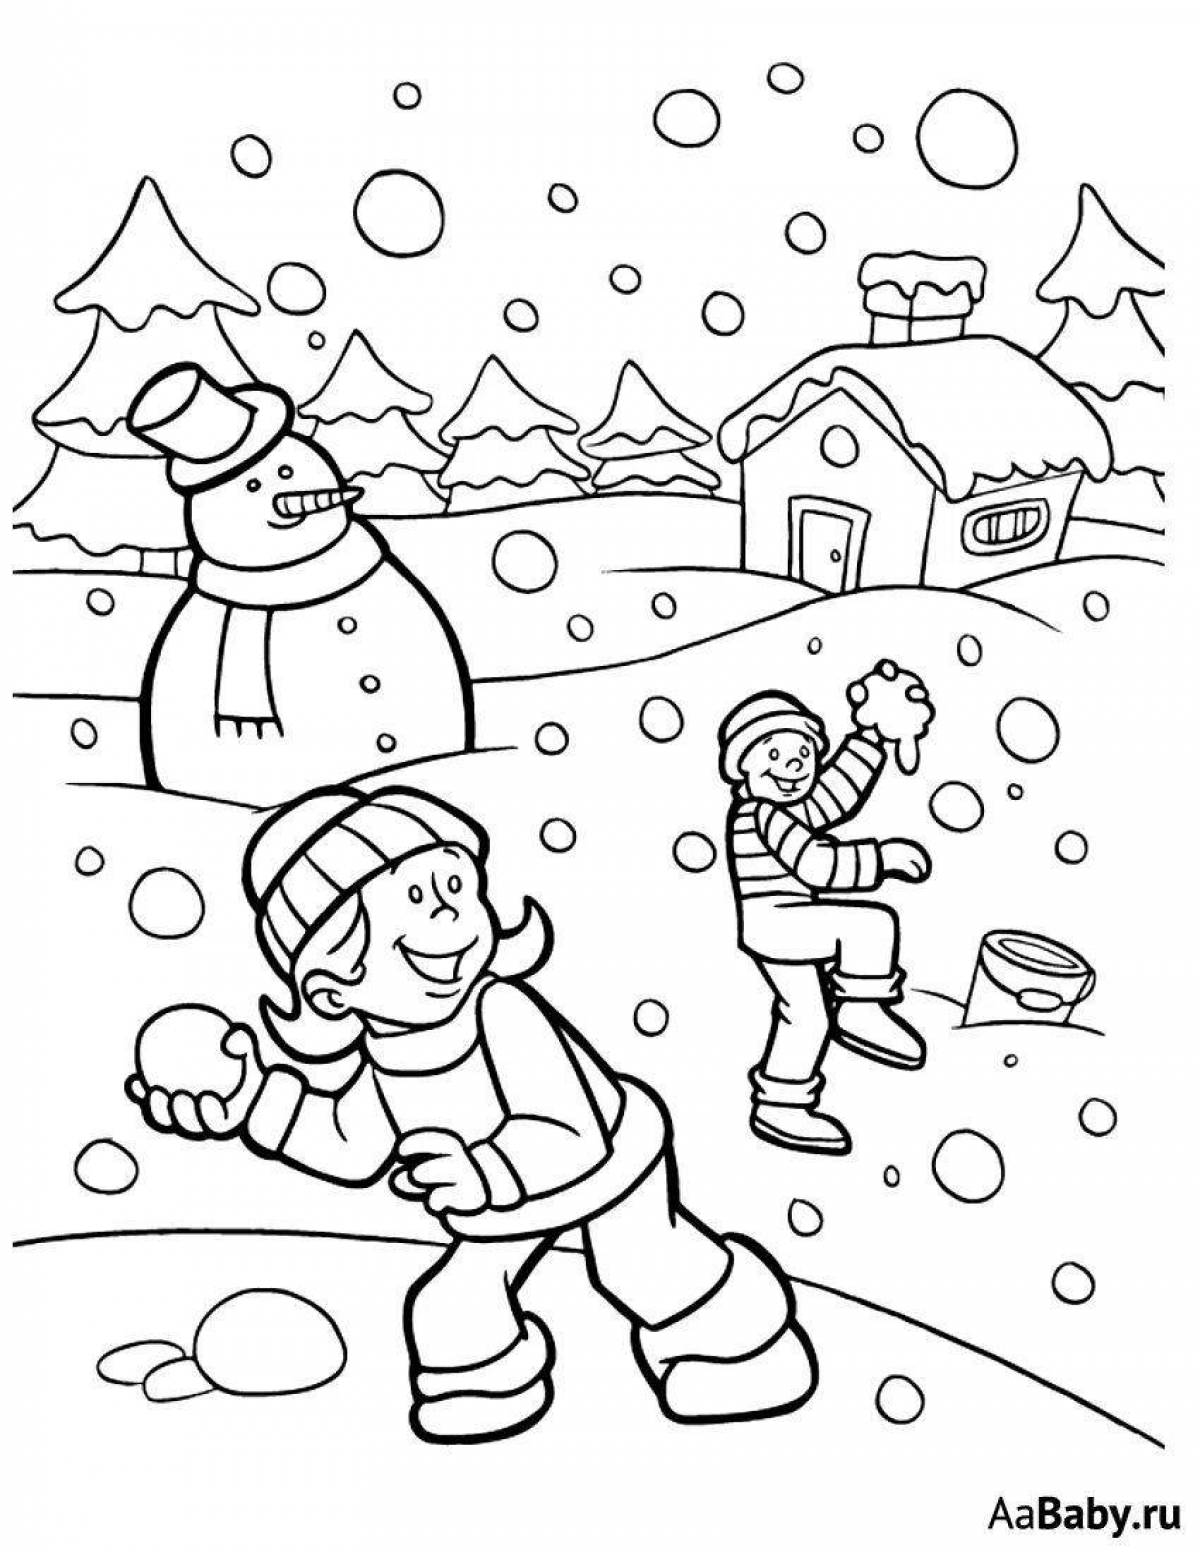 Coloring book funny kids playing snowballs